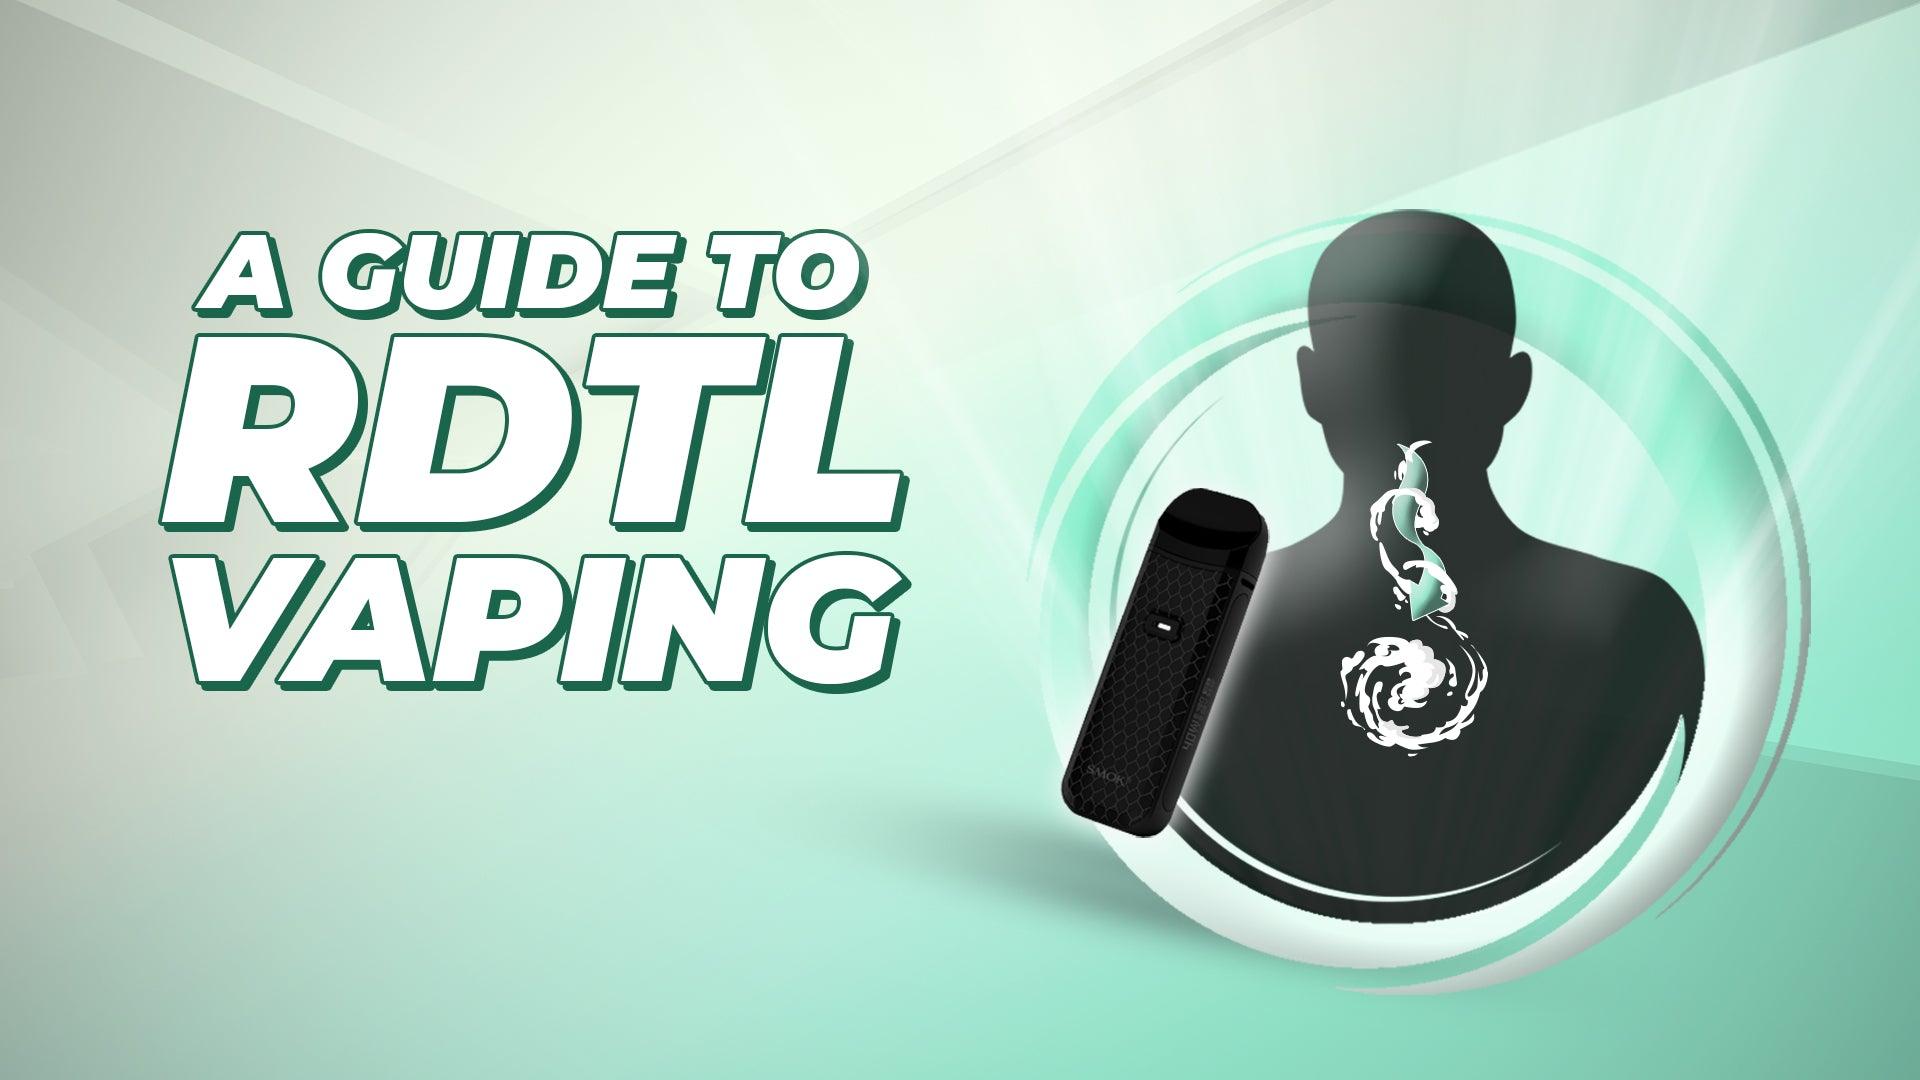 A Guide to RDTL Vaping - Category:Vaping, Sub Category:Pod Kits, Sub Category:Vaping Style